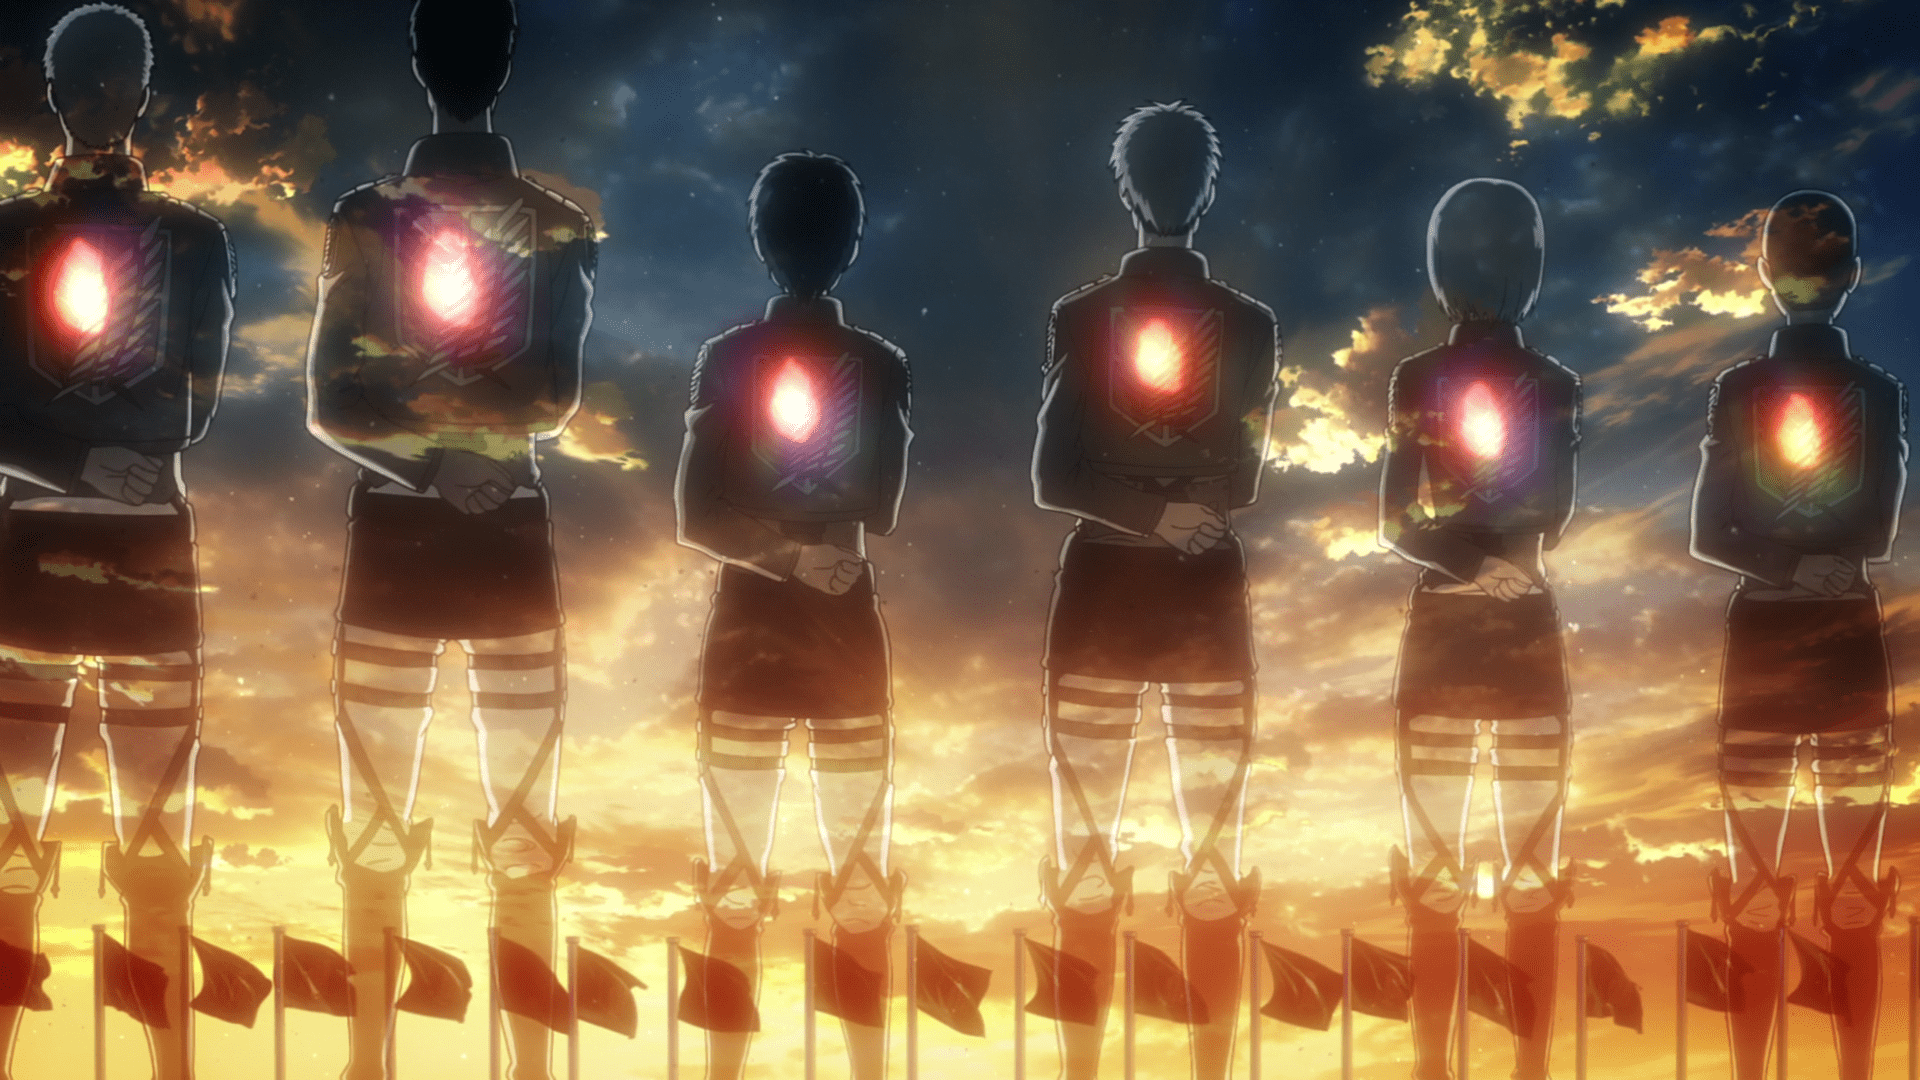 Attack On Titan: Final Season Poster Art Revealed; Get Ready For The Battle